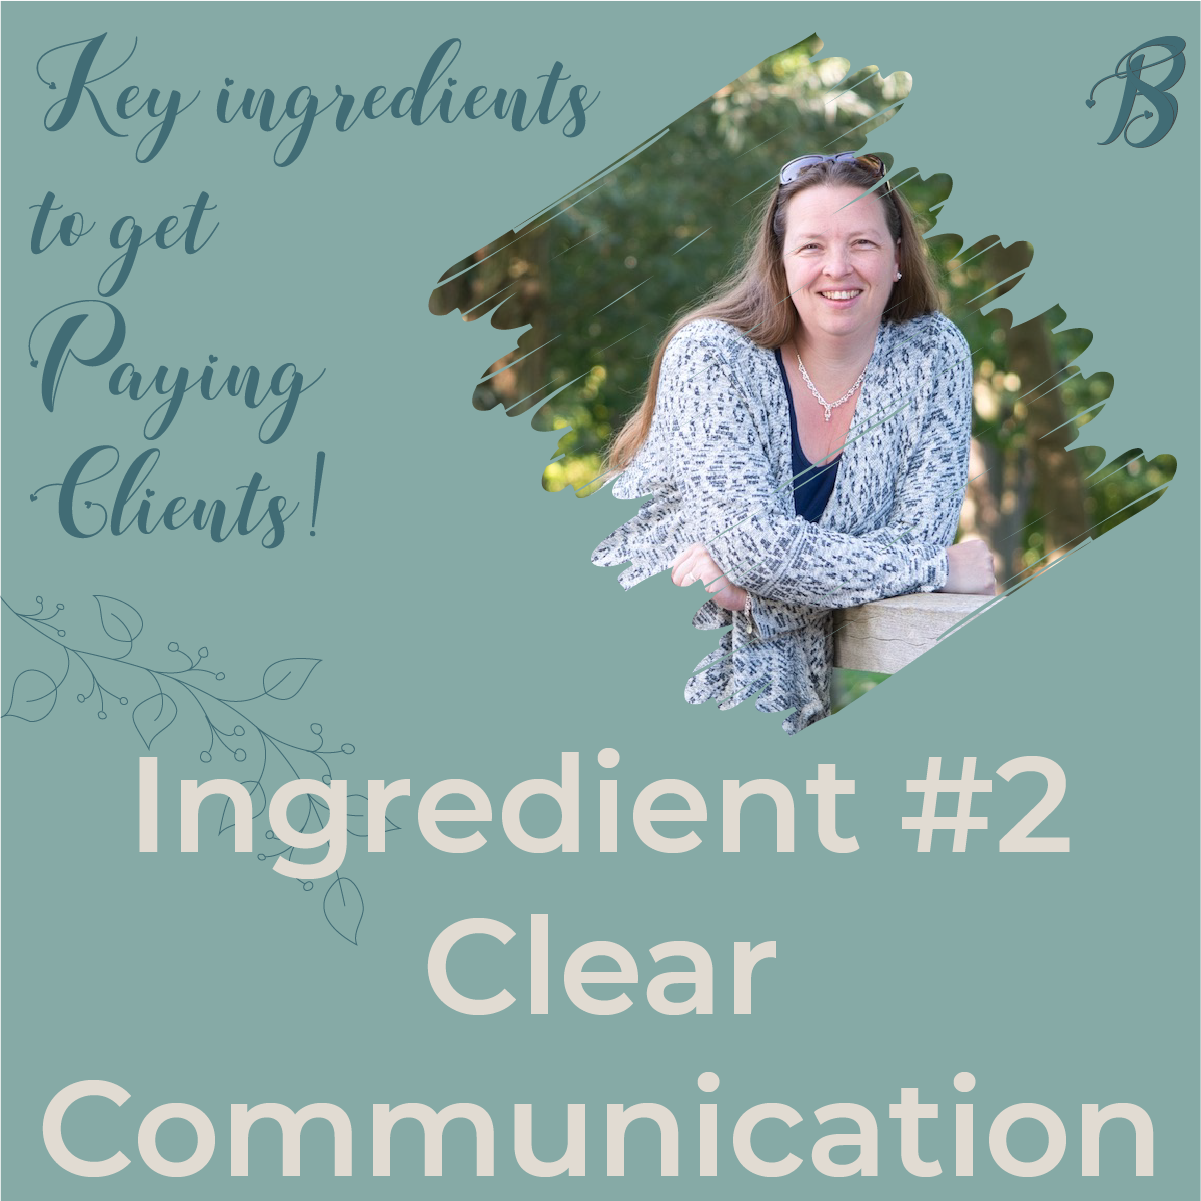 Key ingredients to get paying clients: Ingredient #2 Clear Communication